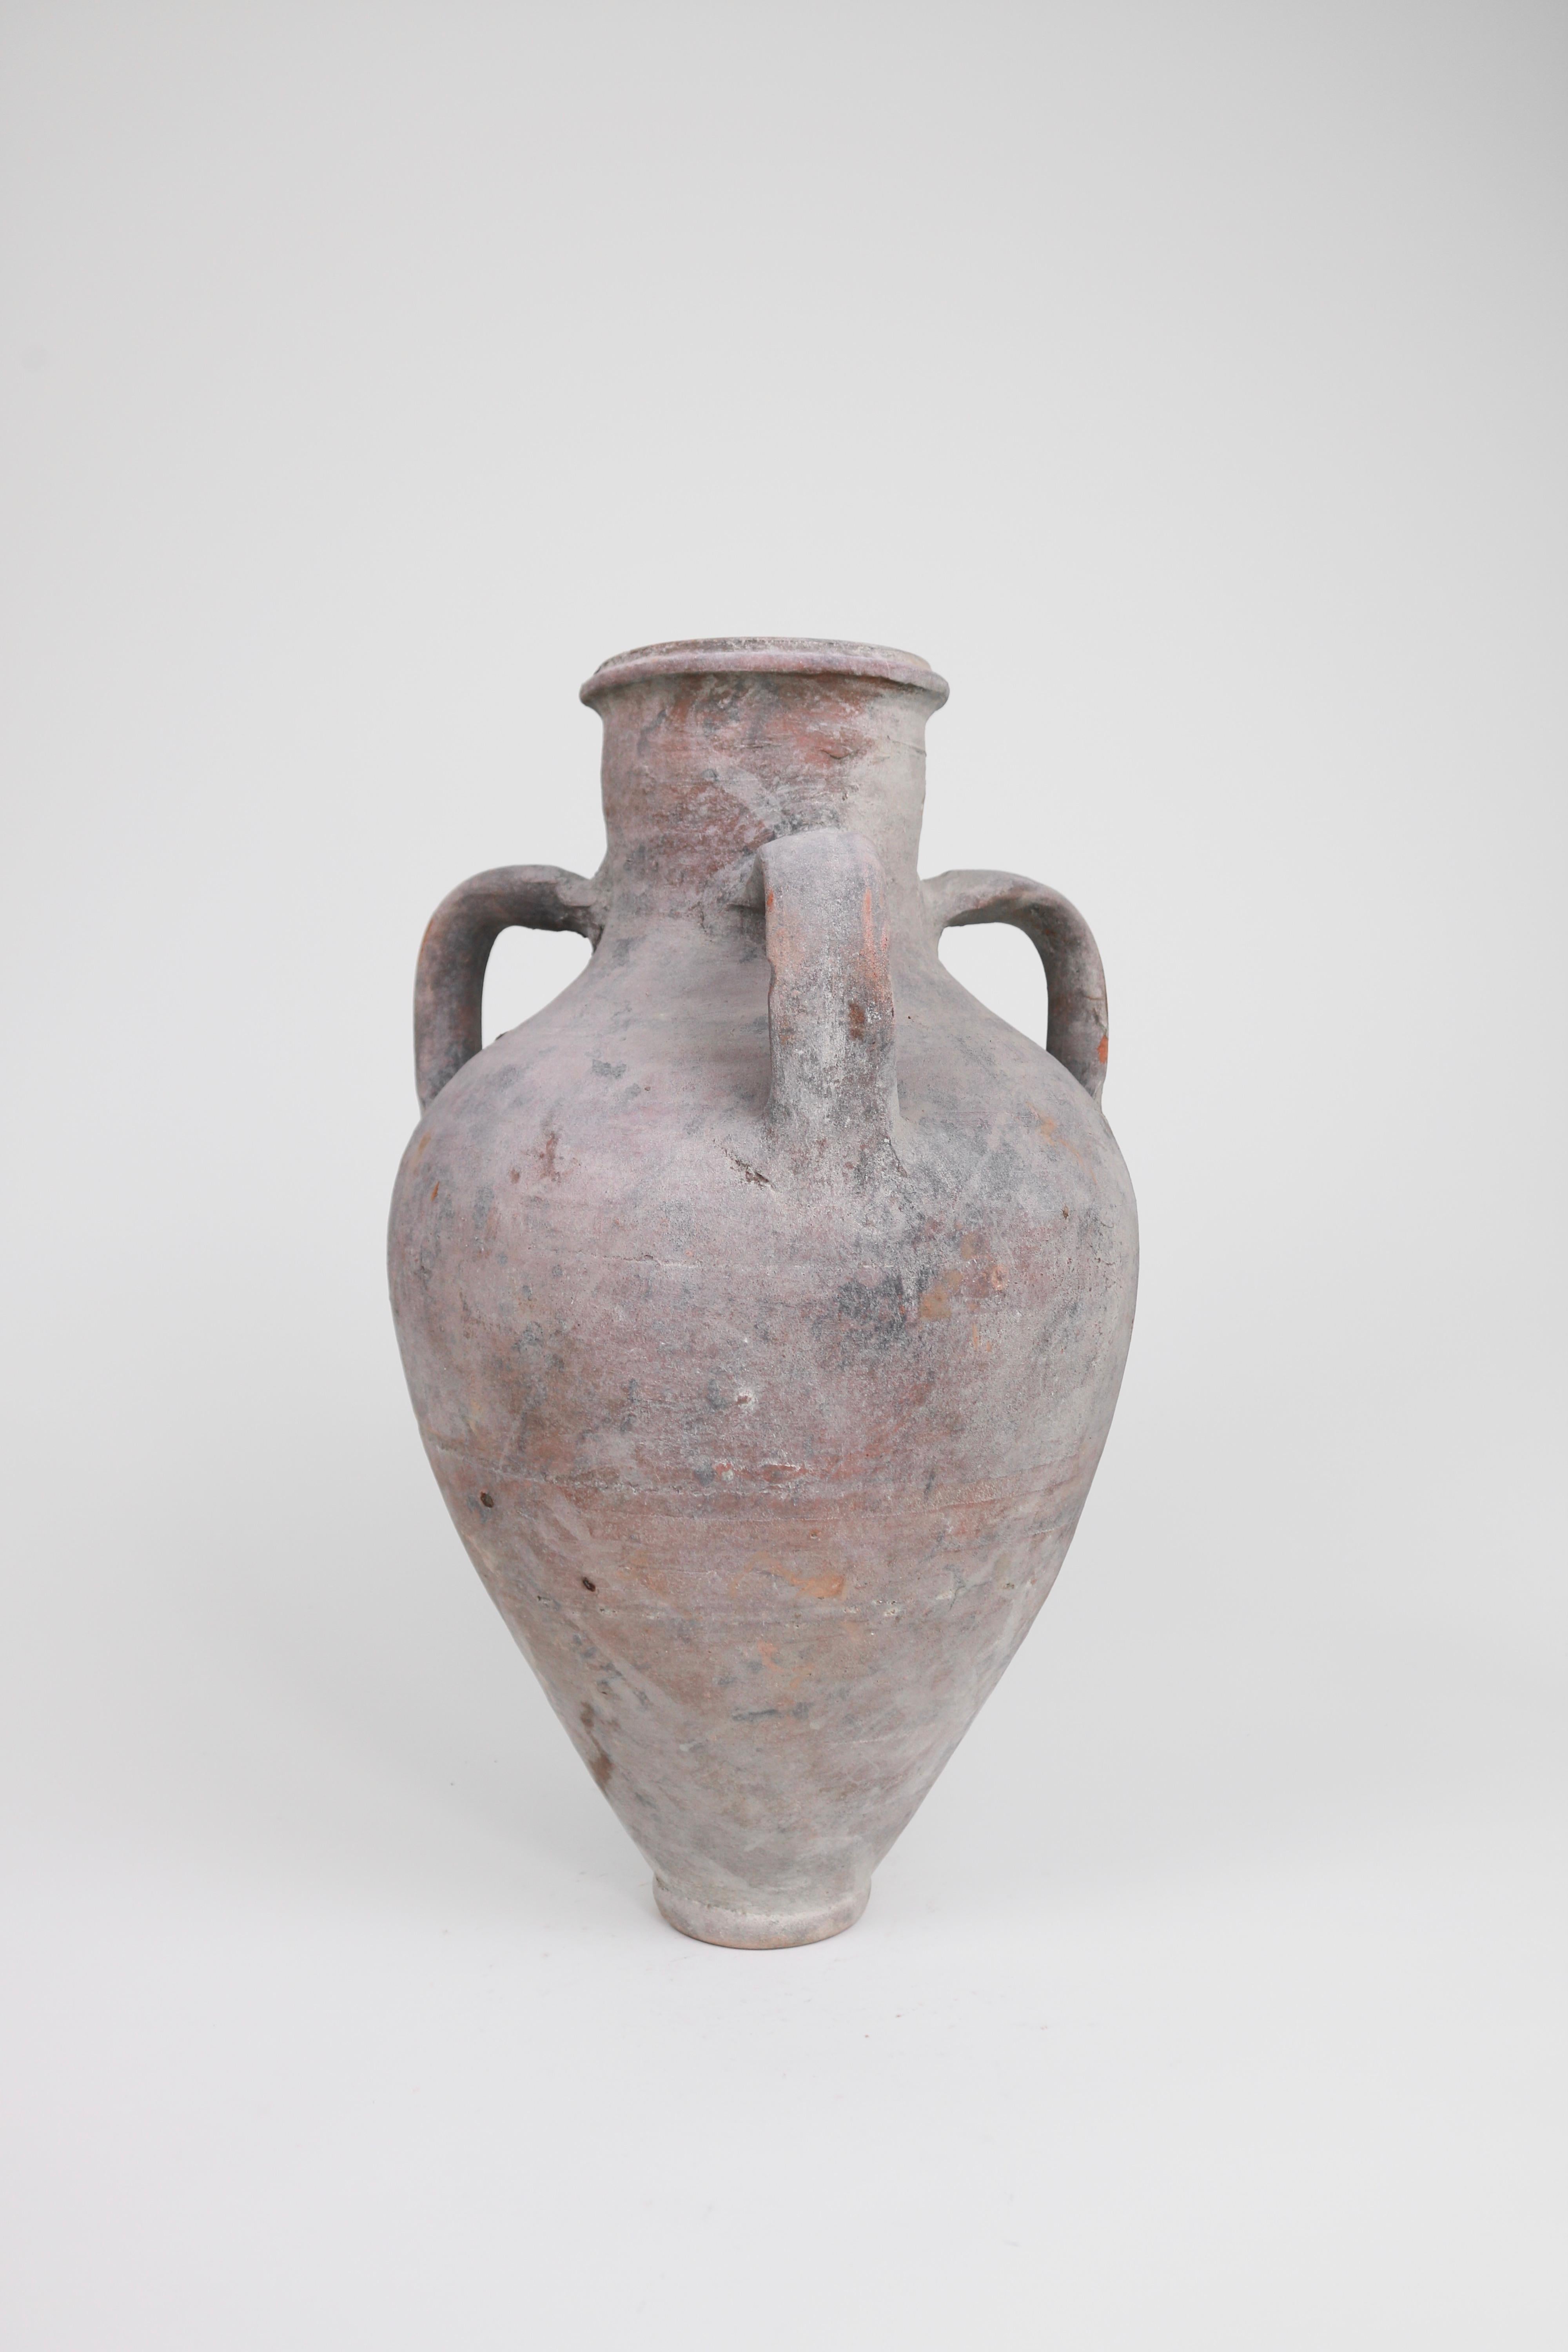 This 3-armed Greek amphora was once used to store and transport liquids in the early 1900s. With an elegantly tapered form and unusual 3-arms, this dusty-hued amphora makes a beautiful display piece. 

Coming from the Peloponnese area of Greece,